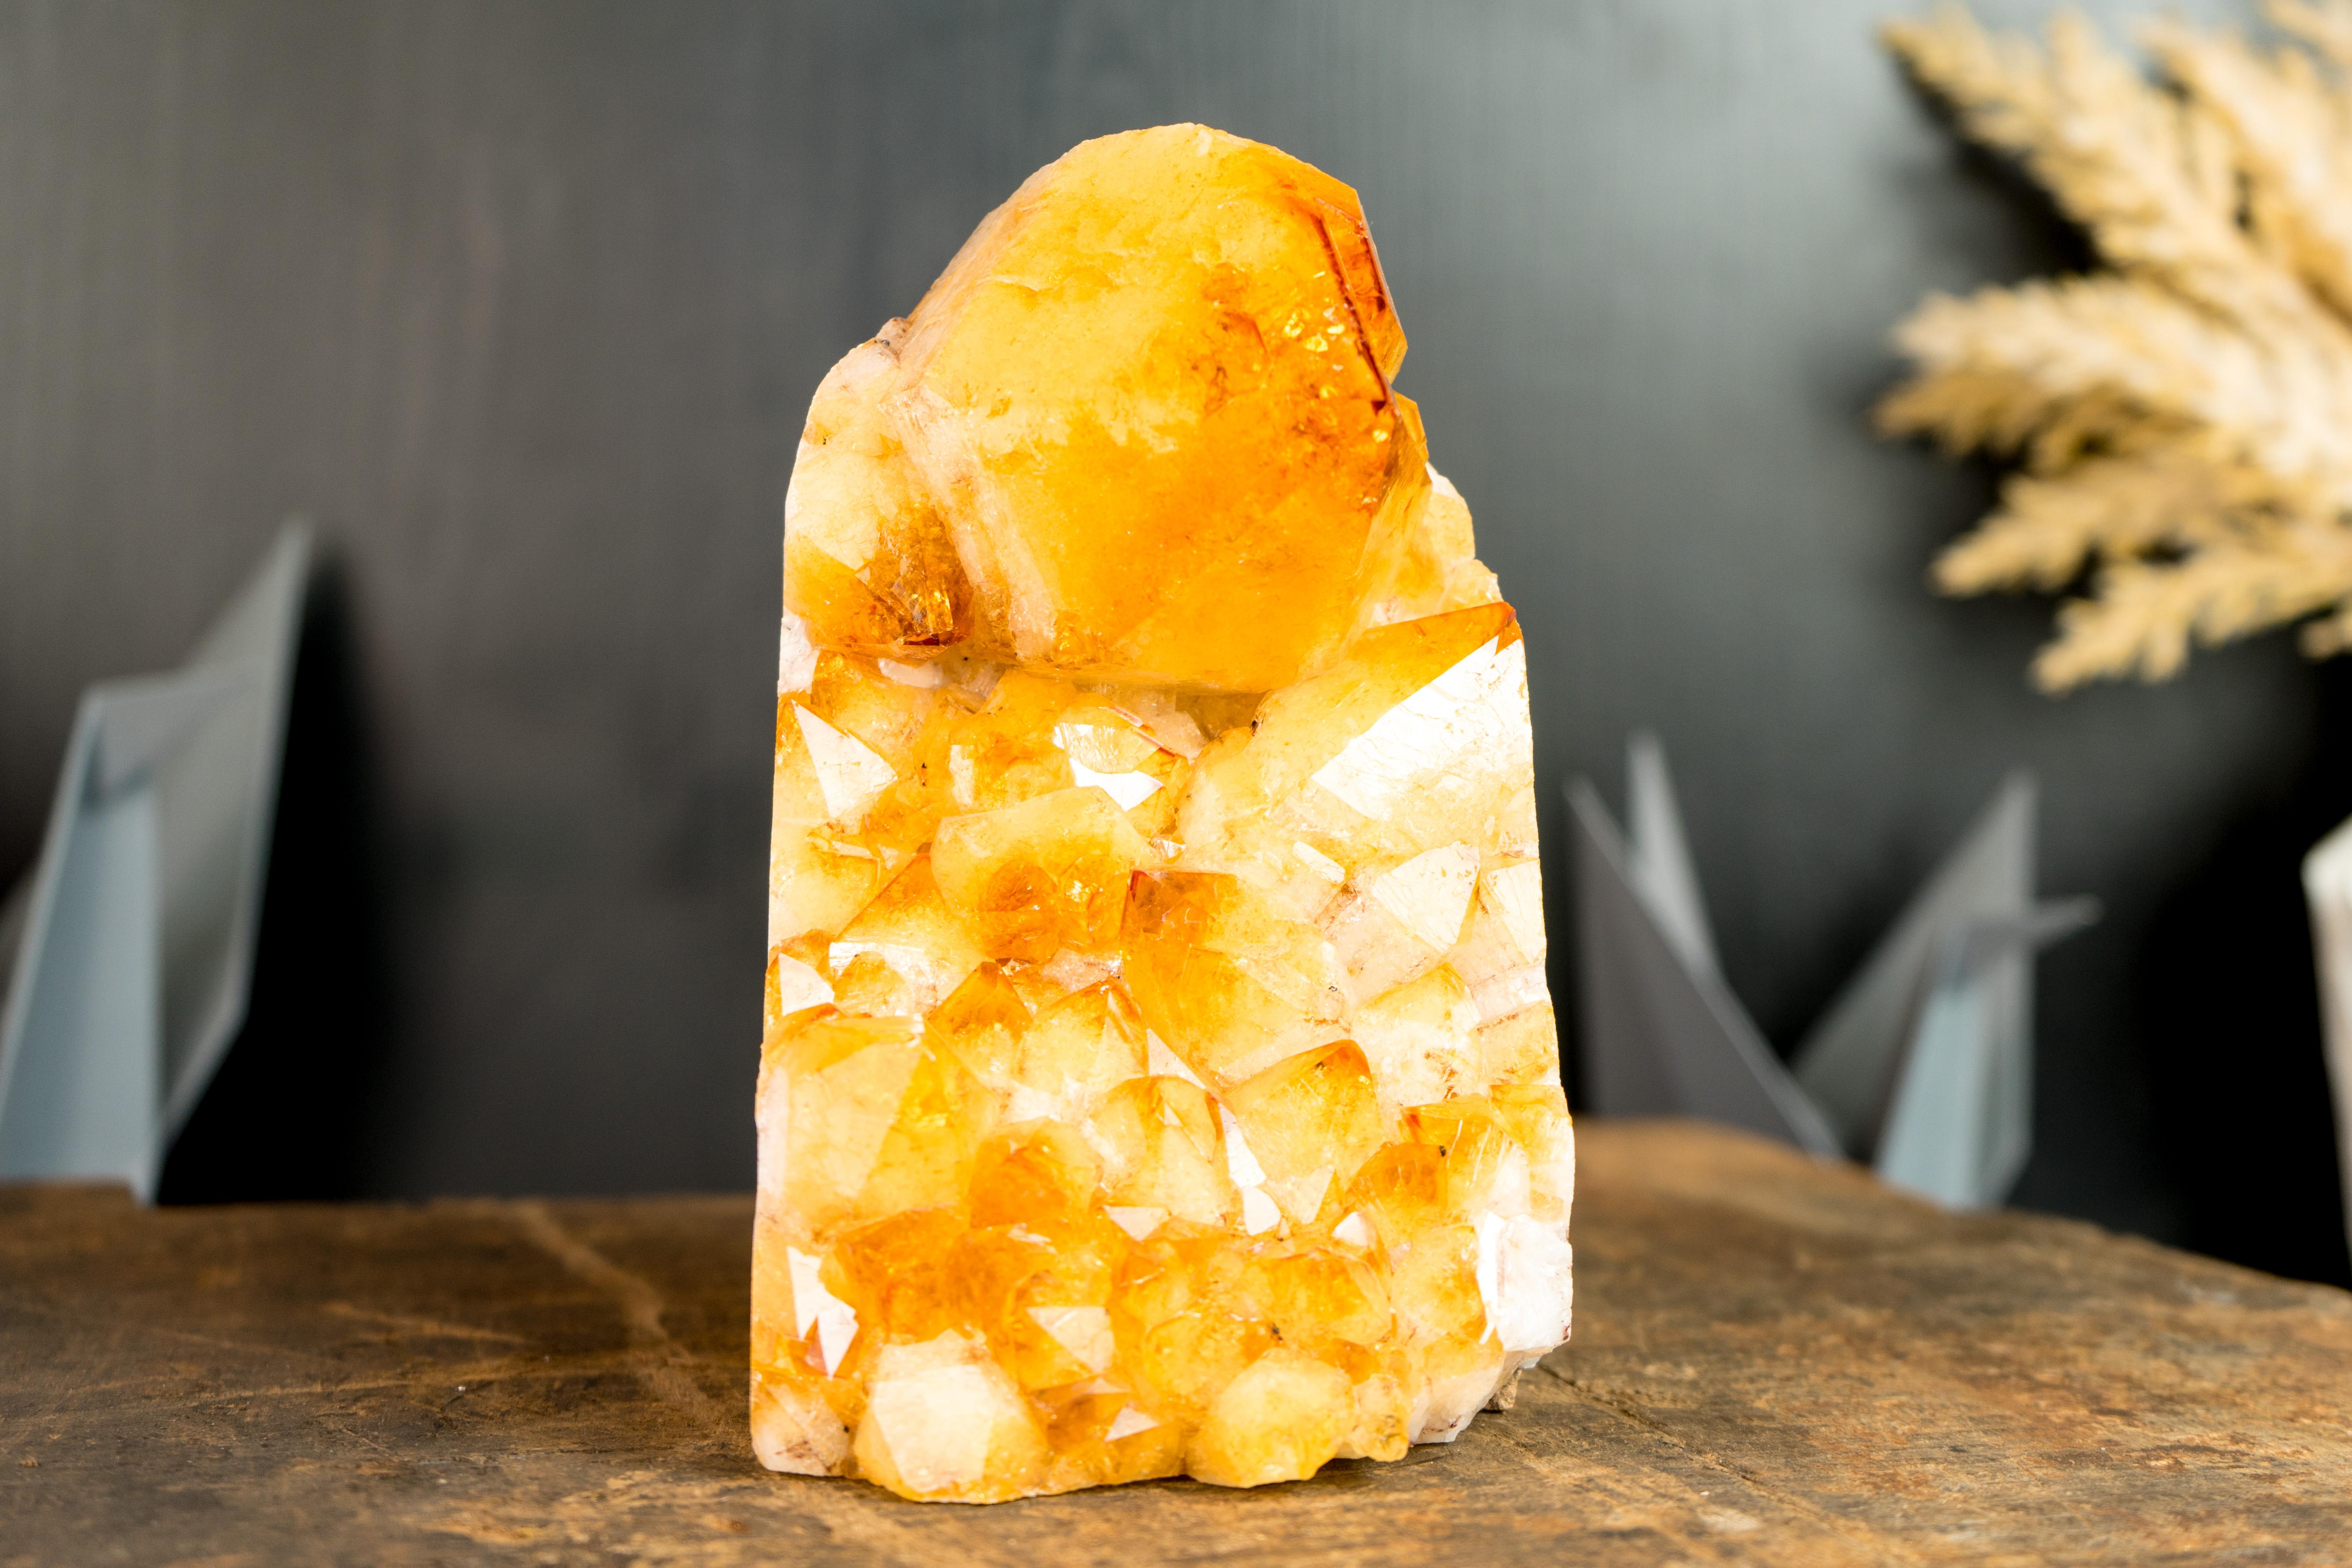 Brazilian Citrine Cluster with Rare Large Citrine Point, Orange Citrine Color, Intact For Sale